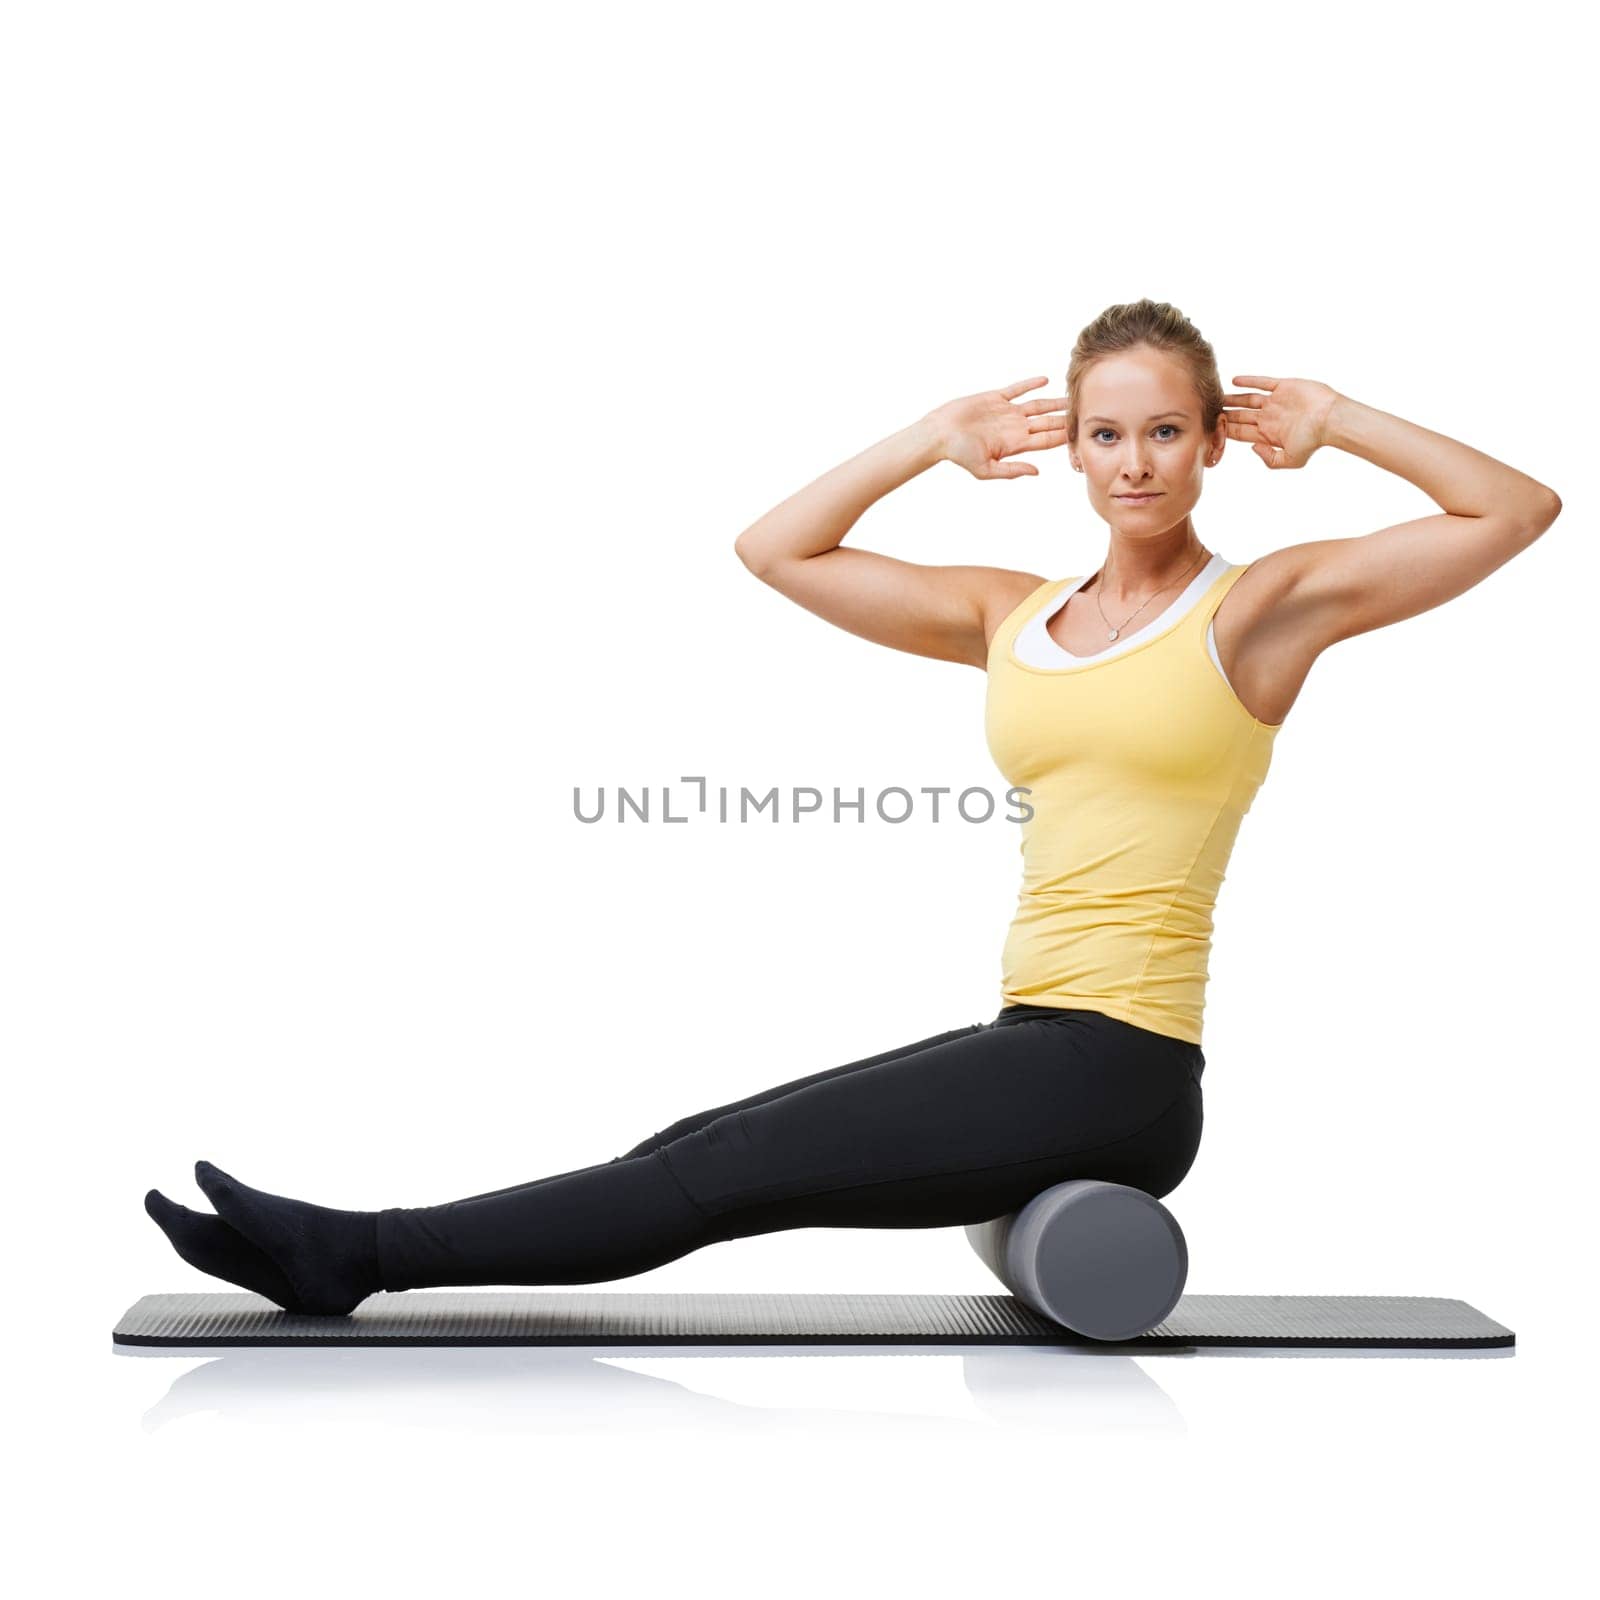 Studio workout, foam roller and portrait of woman with posture exercise, stretching or yoga performance challenge. Floor, core training or person sitting on fitness club equipment on white background by YuriArcurs